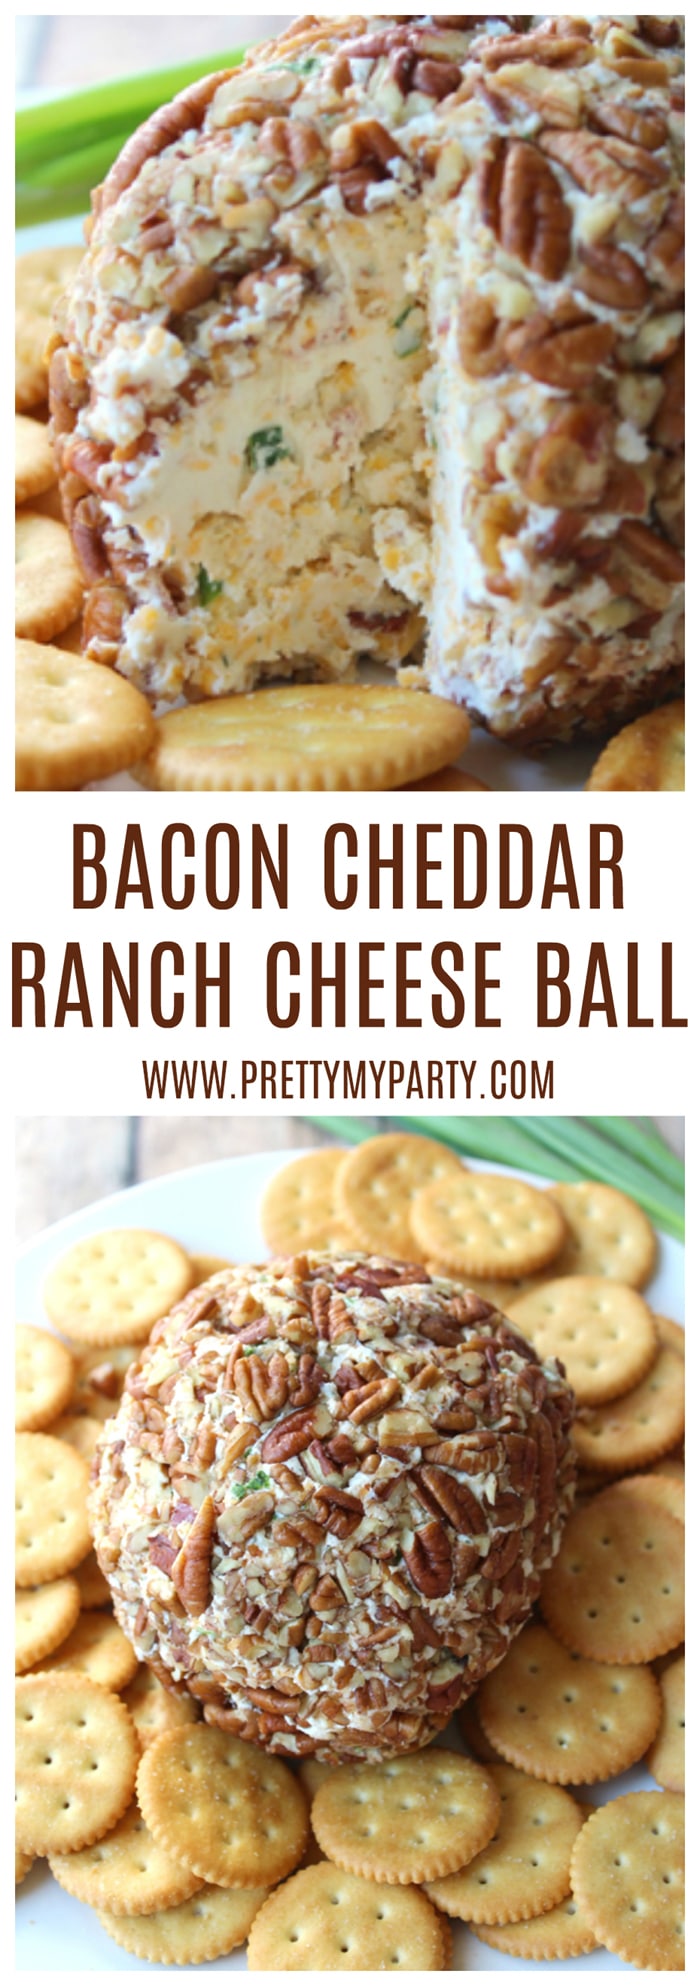 Best Cheddar Bacon Ranch Cheese Ball - Pretty My Party